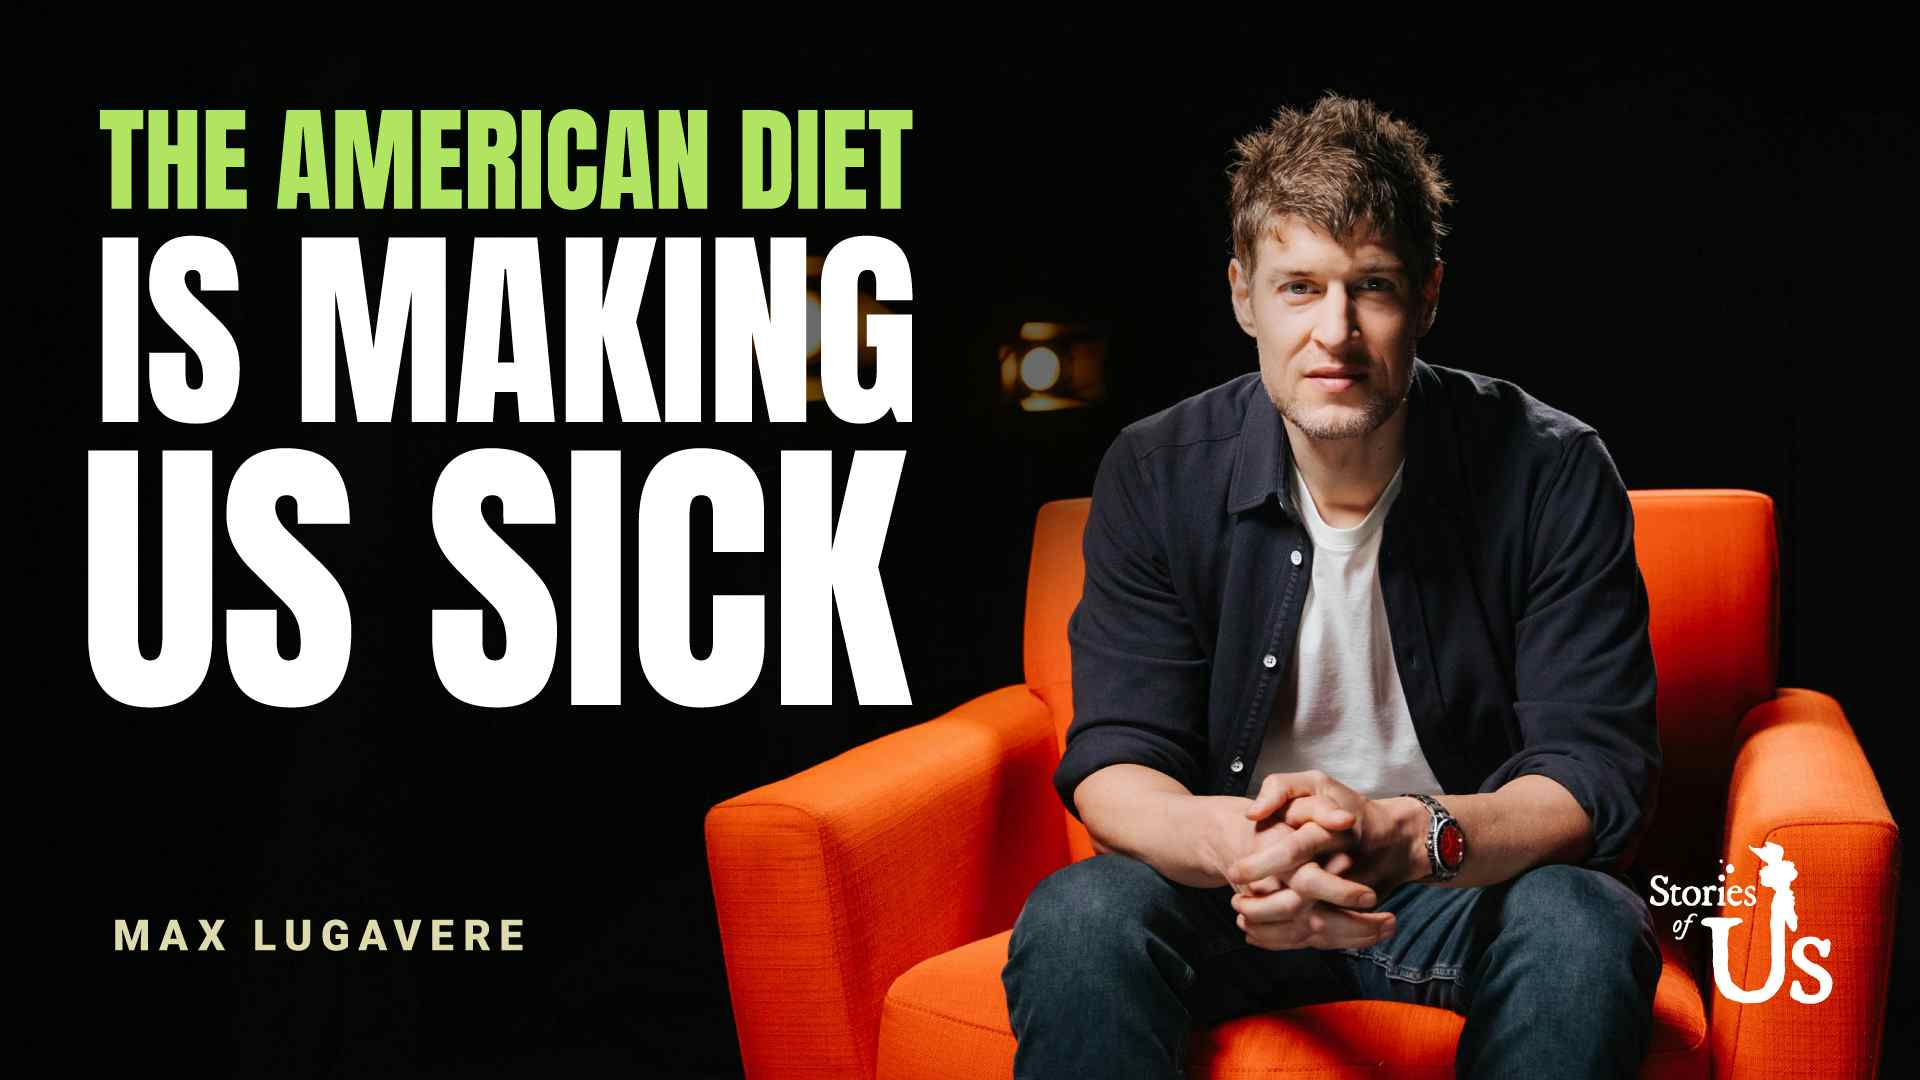 Max Lugavere: The American Diet Is Making Us Sick